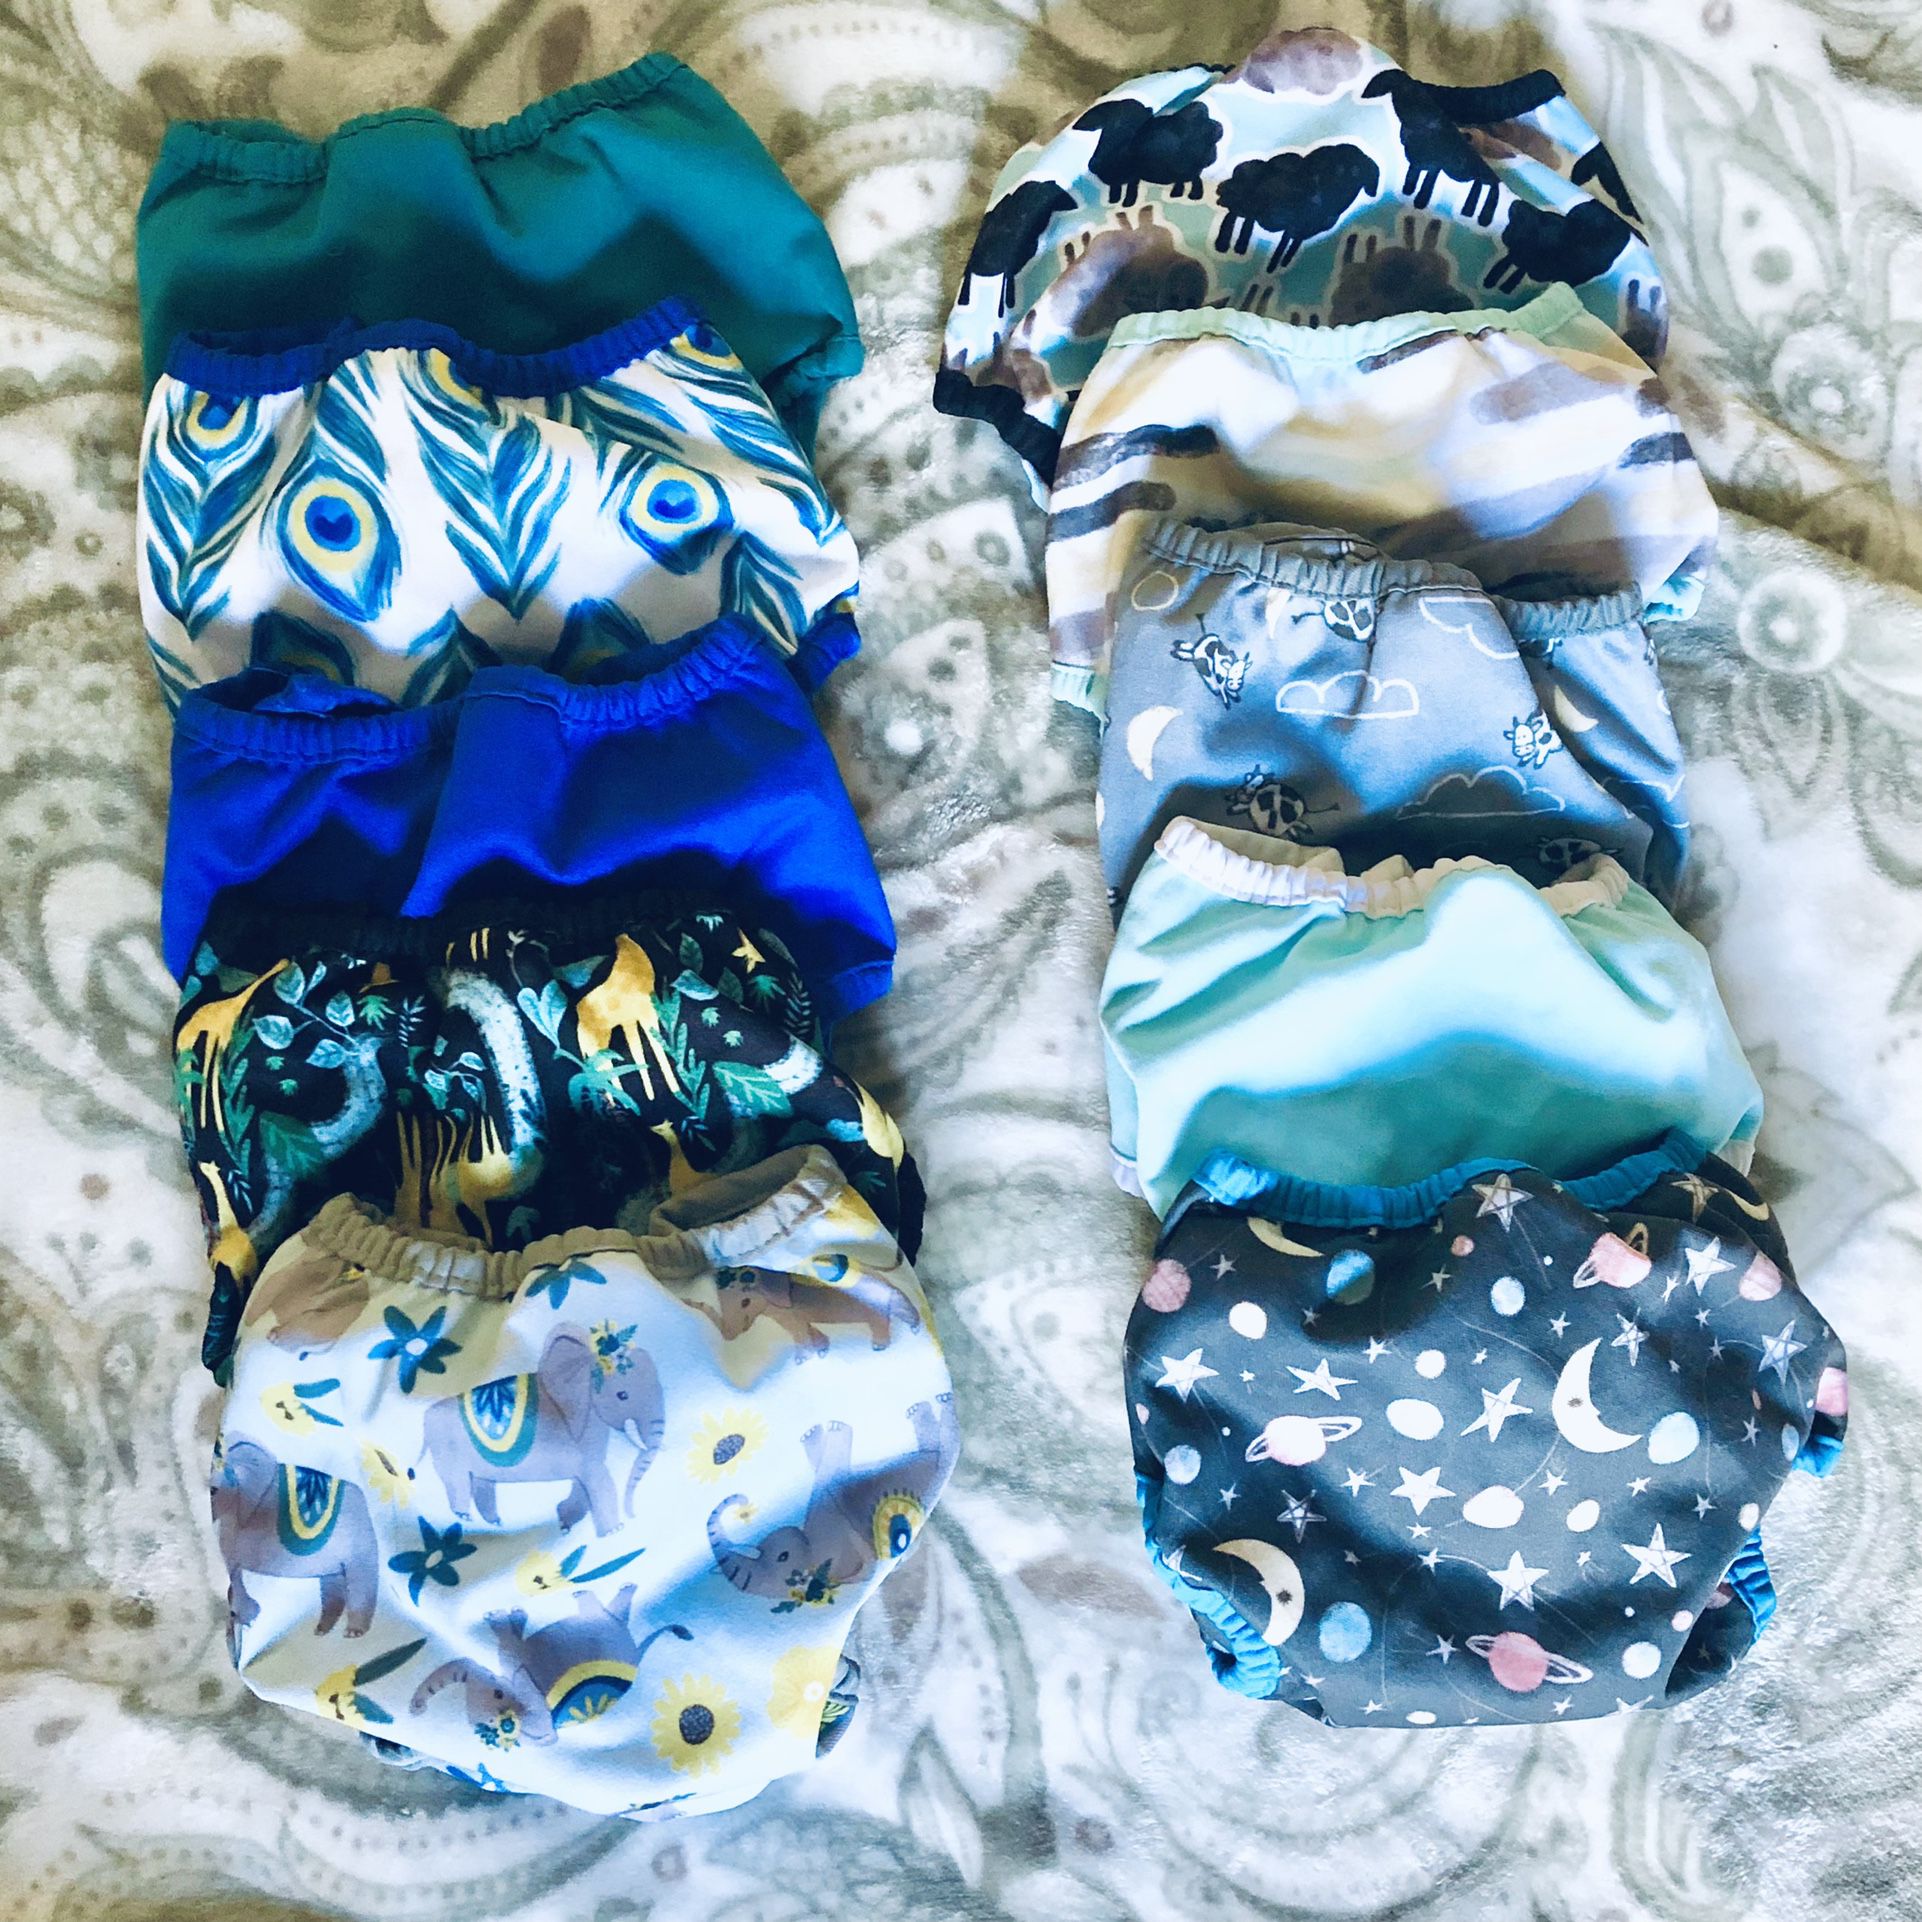 Cloth Diaper Set: 10 Unisex Diaper Covers, 24 Bamboo Liners, 24 Absorbency Pads